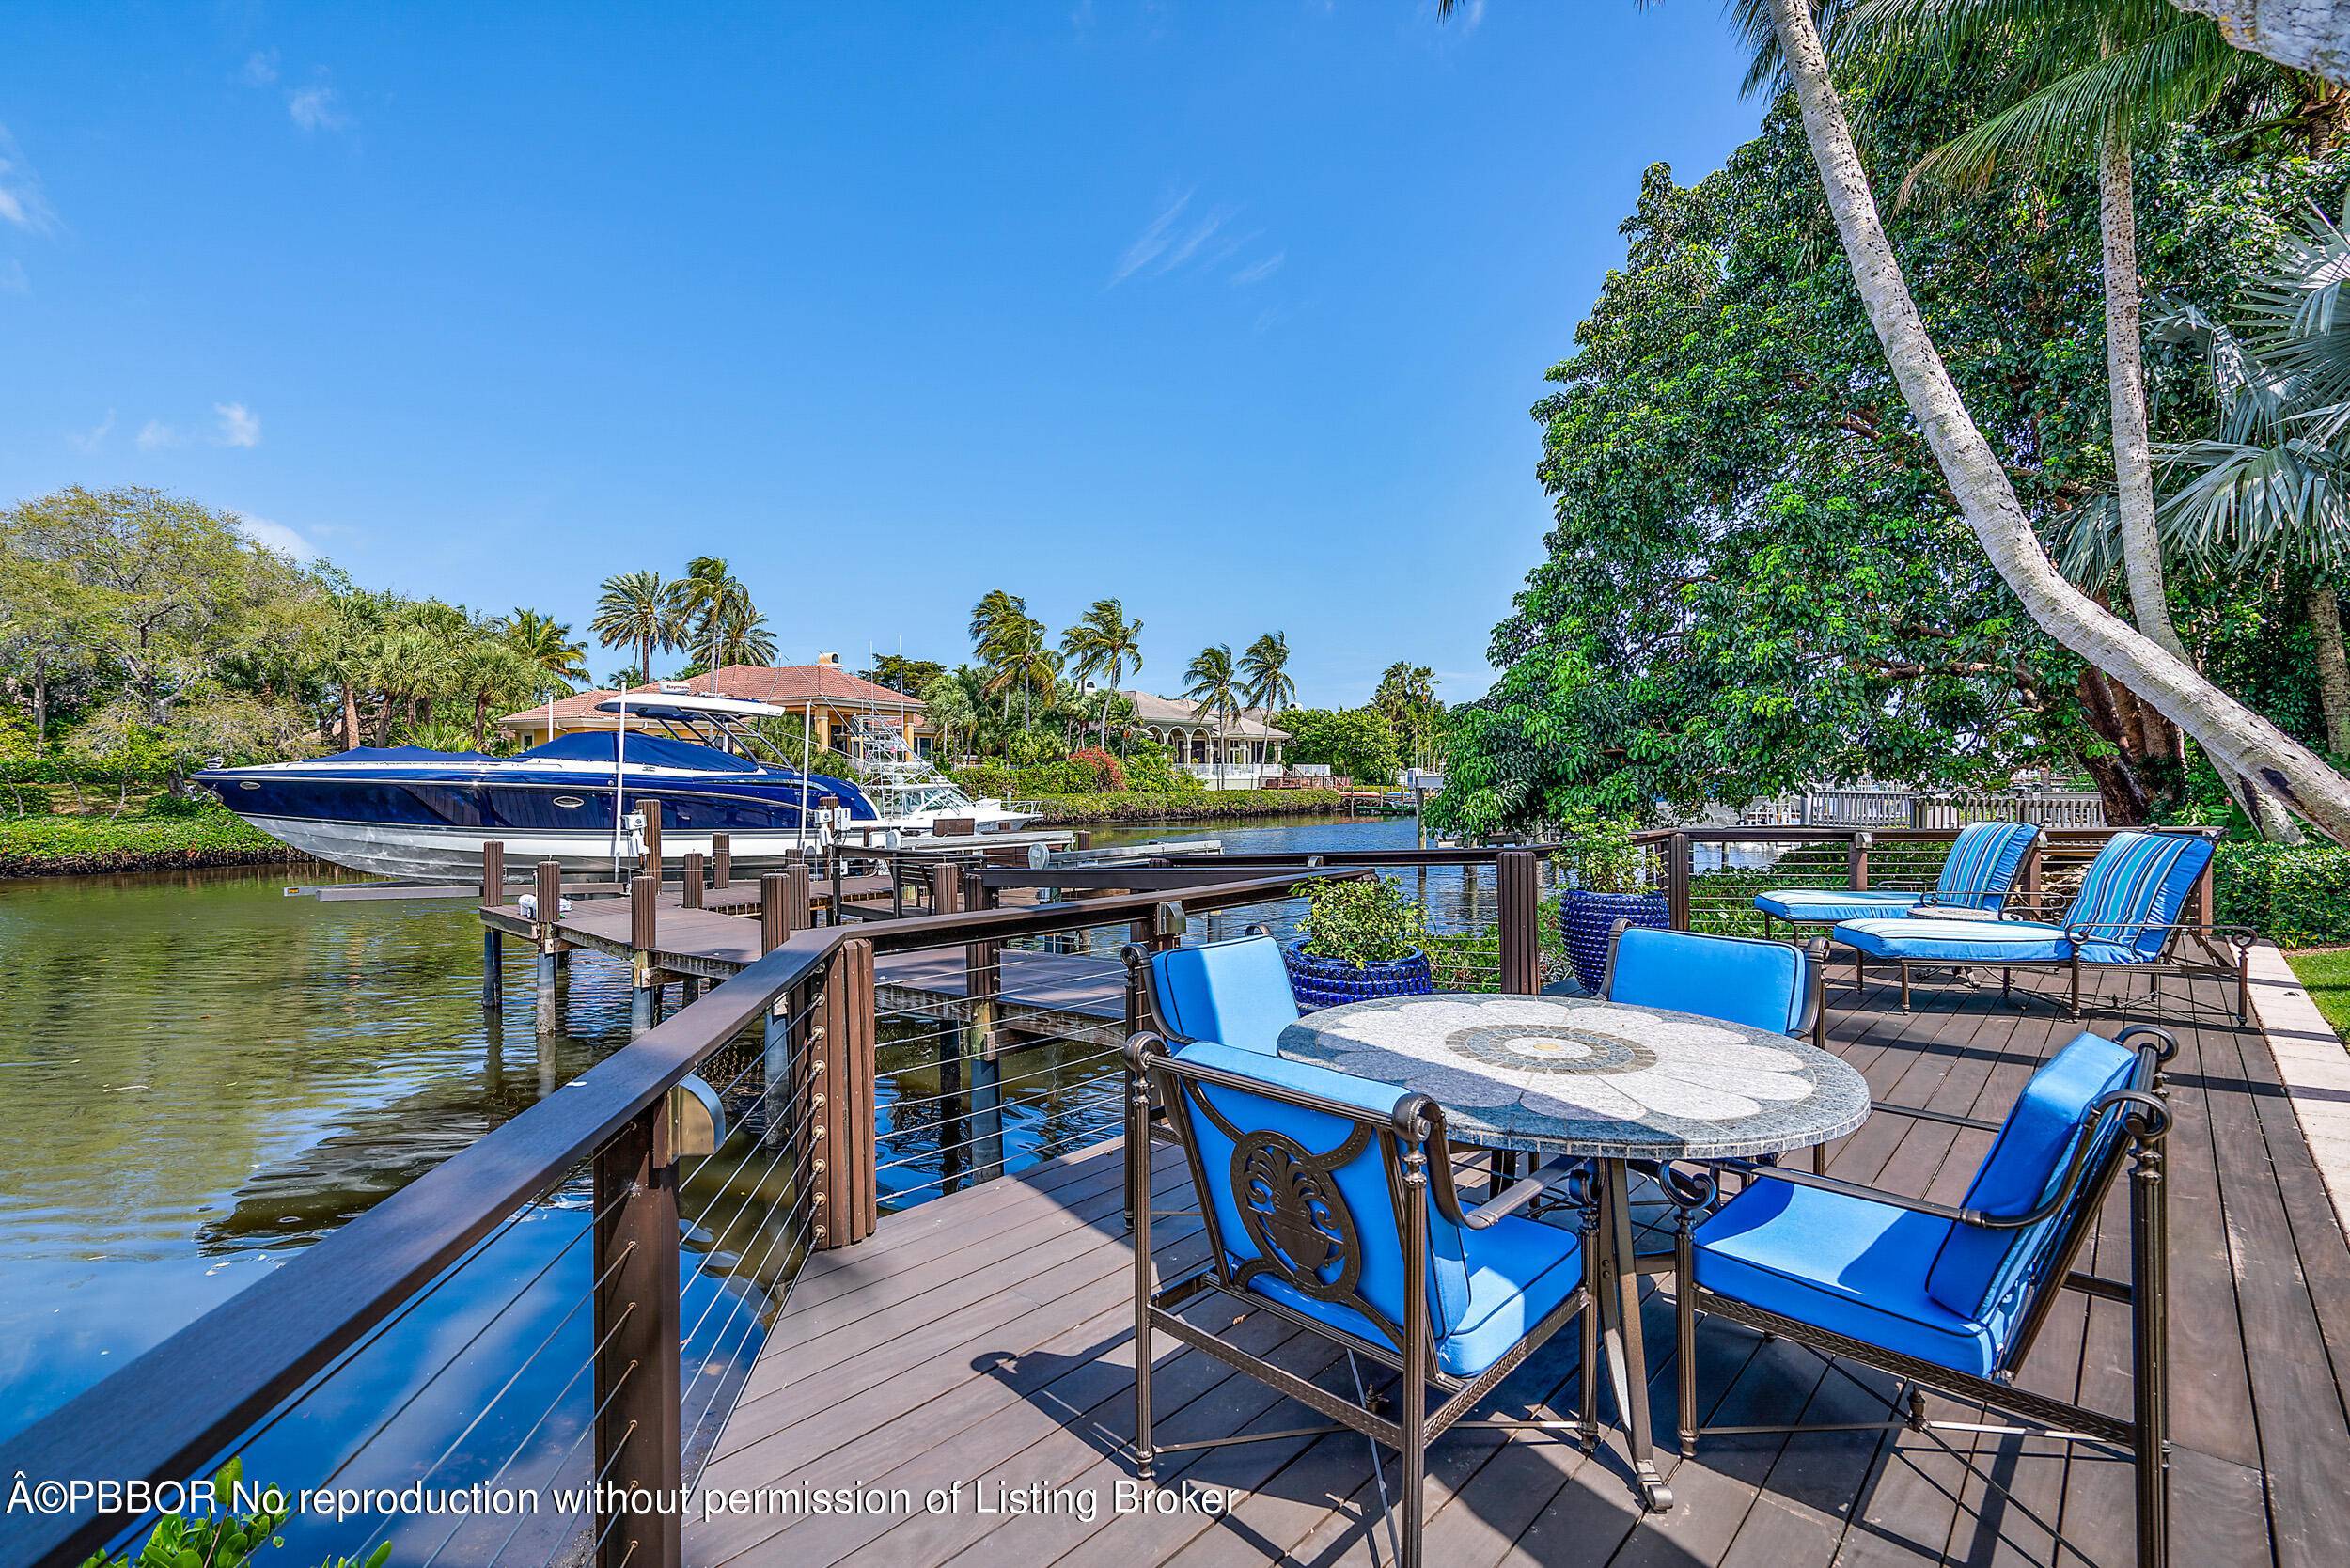 Elegant, timeless and ultra private waterfront estate perfect for indoor and outdoor entertaining.